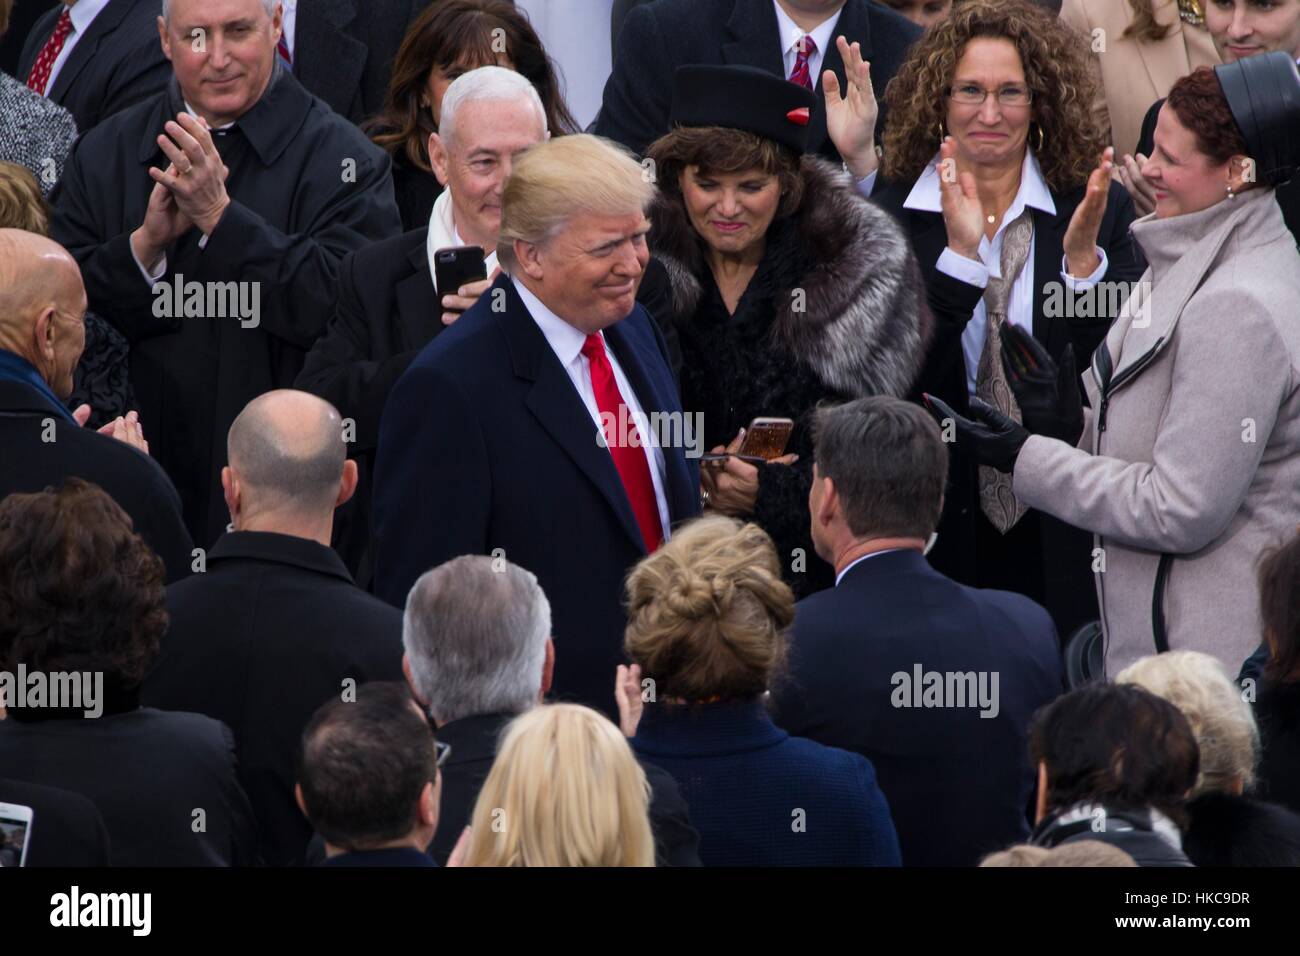 U.S. President Donald Trump walks through a crowd during the 58th Presidential Inauguration at the U.S. Capitol Building January 20, 2017 in Washington, DC. Stock Photo